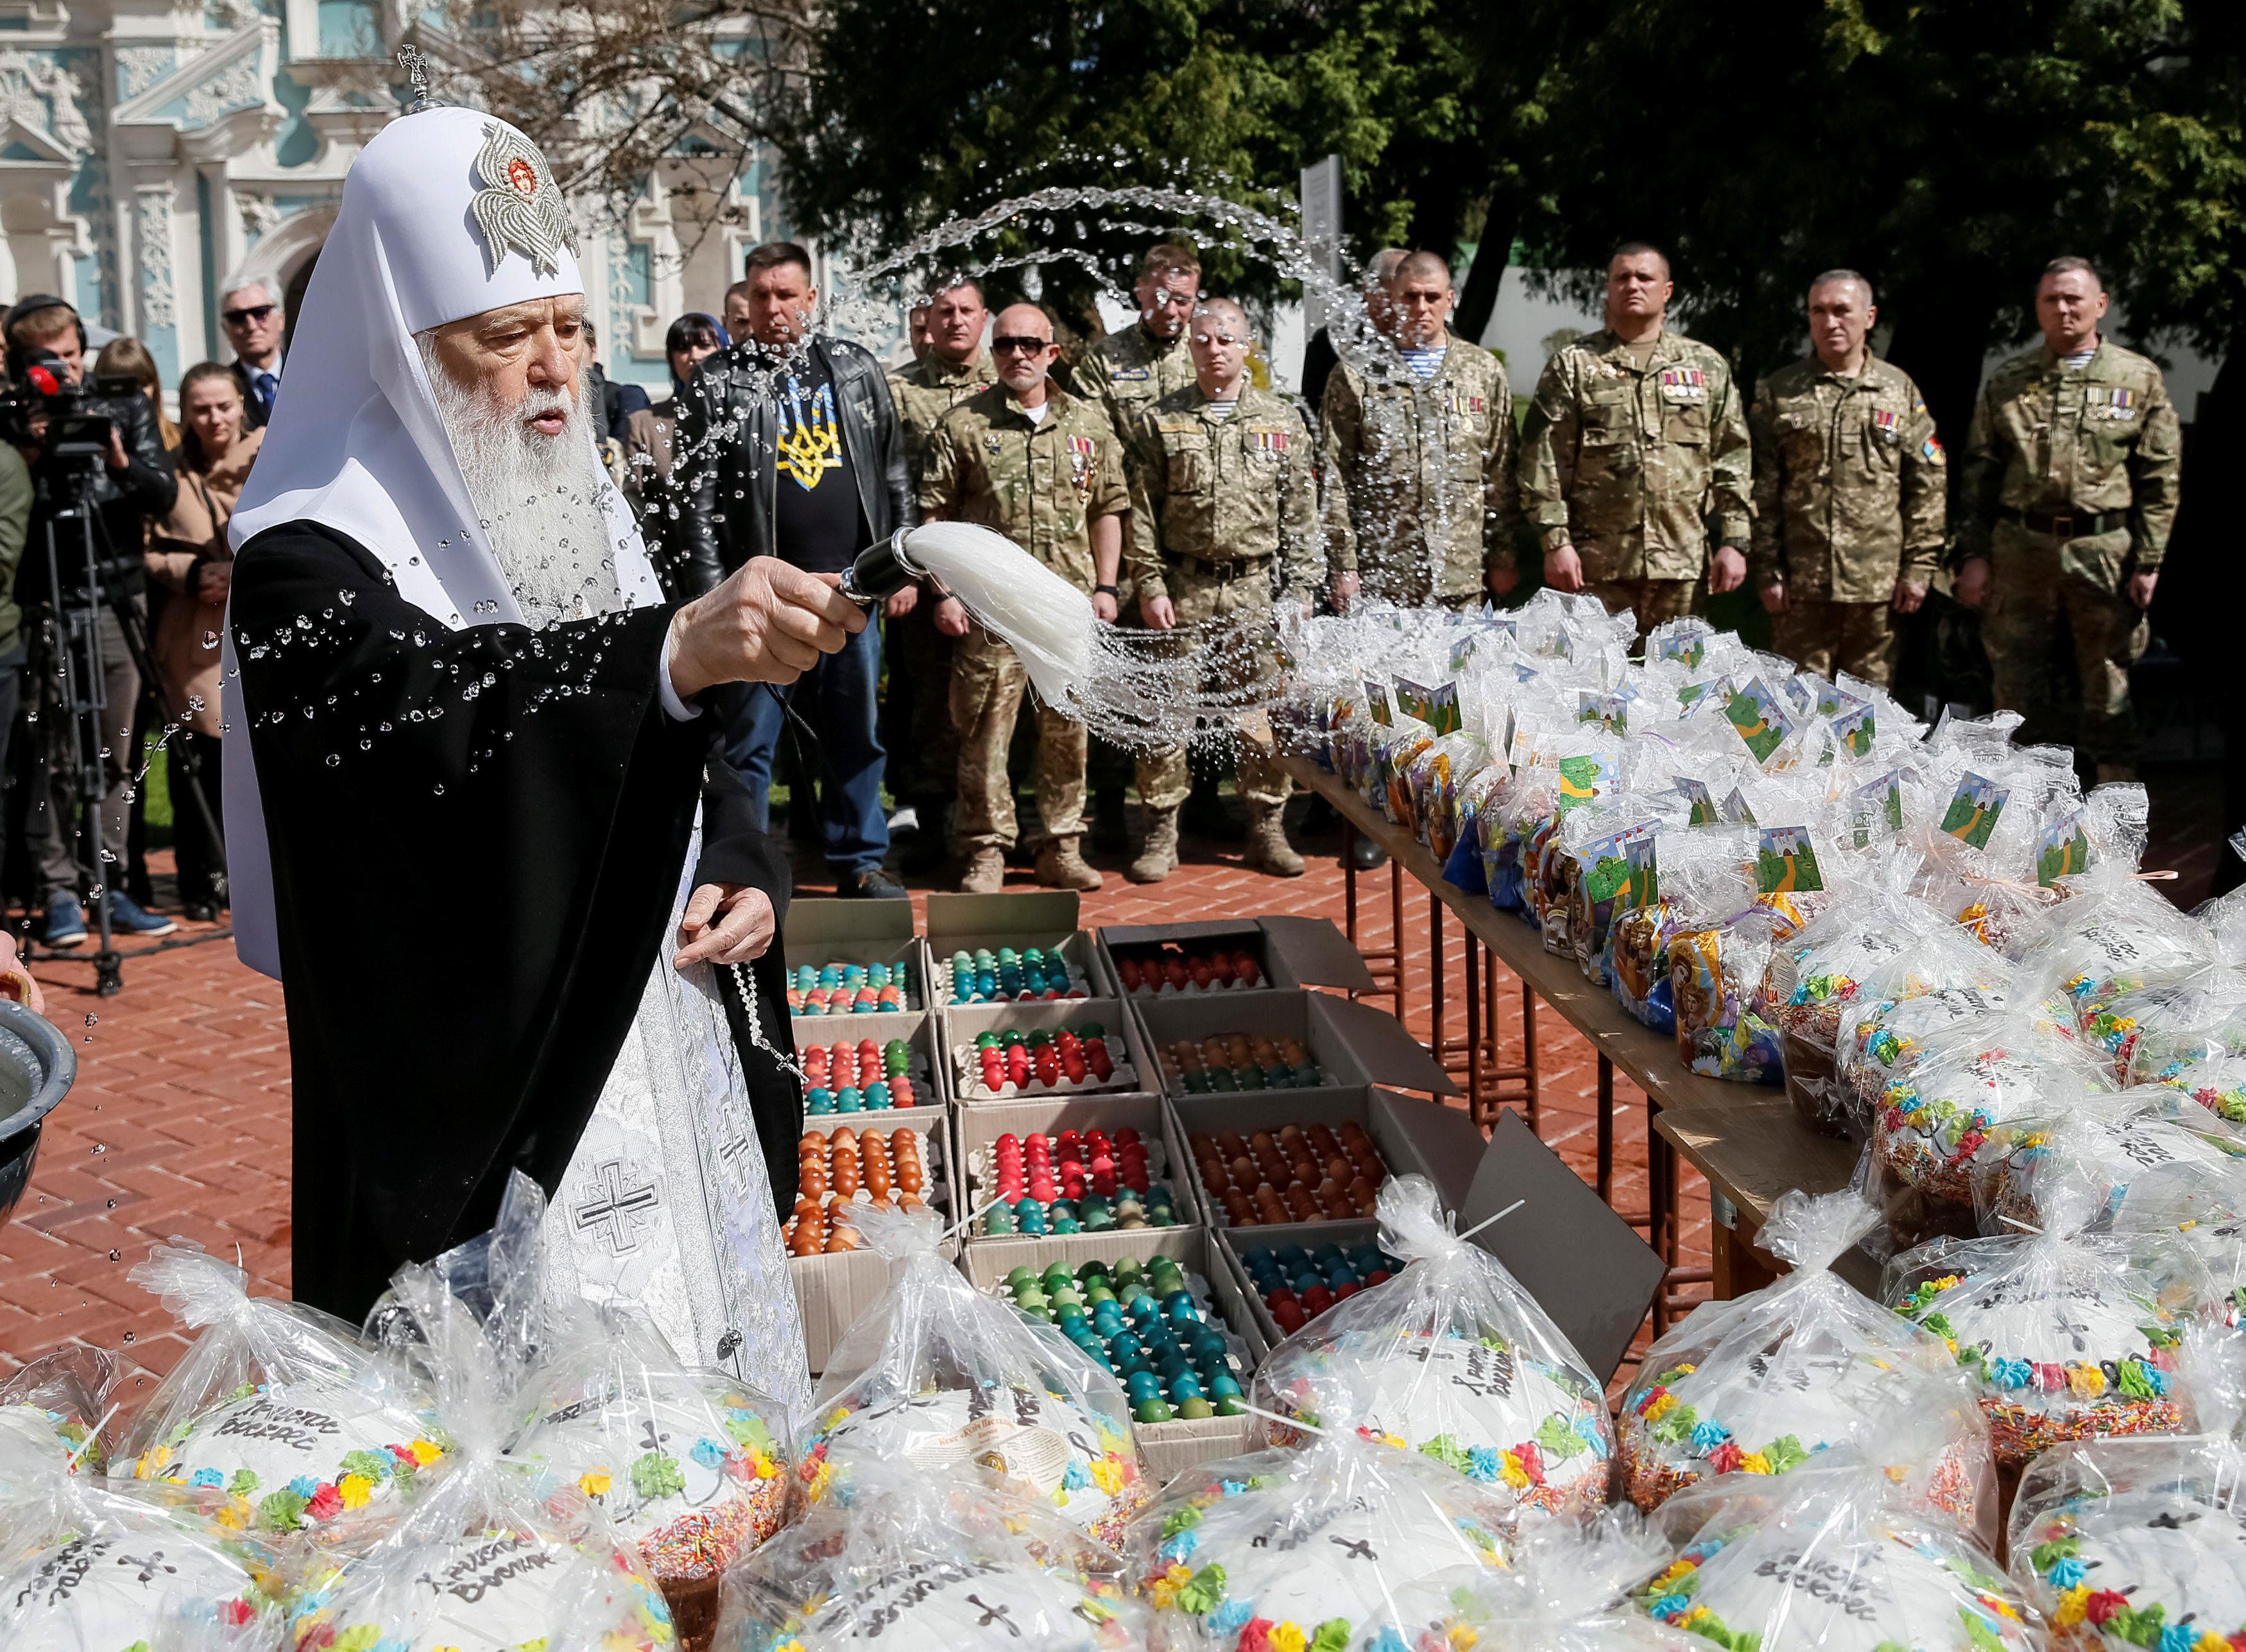 Metropolitan Filaret, the head of one of Ukraine's Orthodox churches, sprinkles holy water during a 